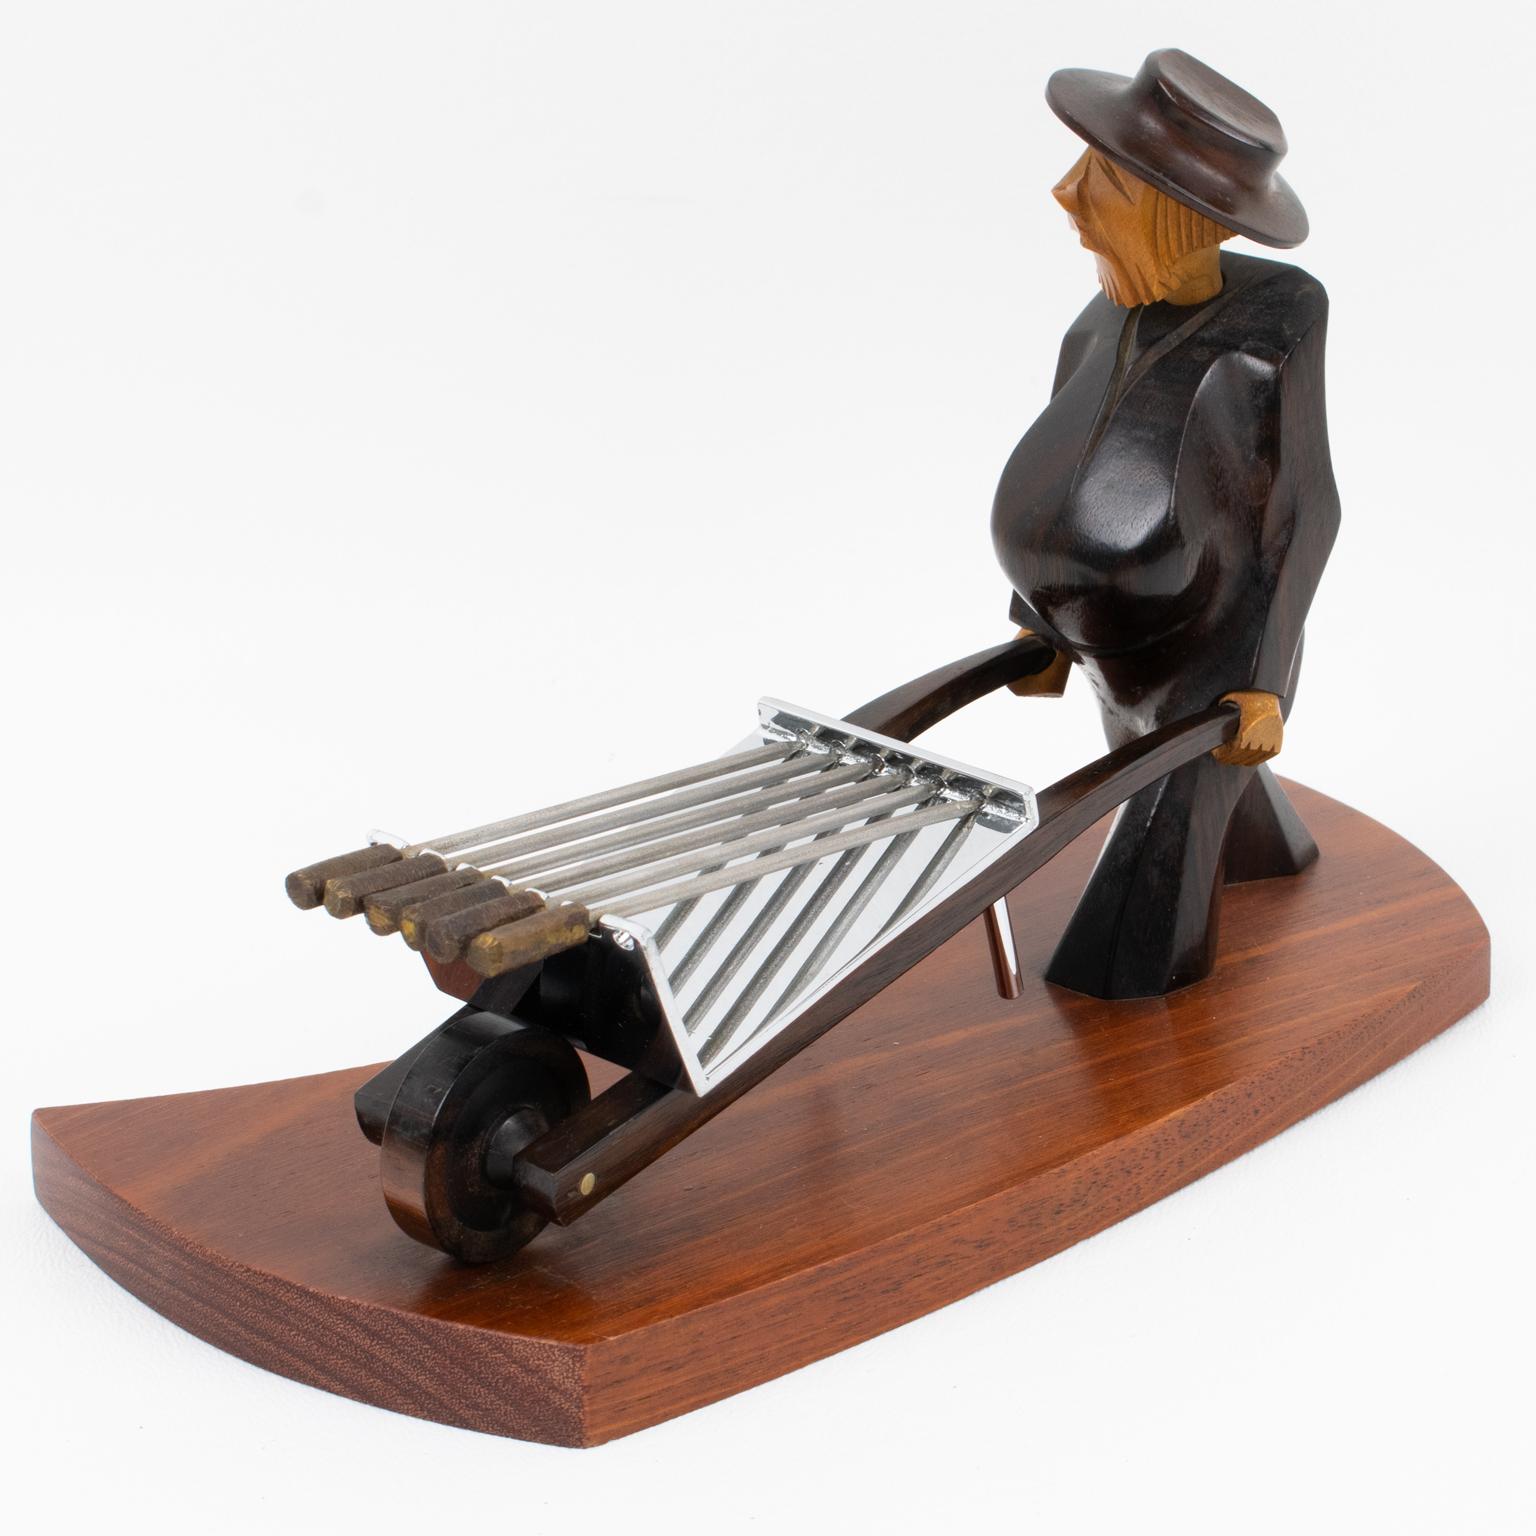 This stunning Art Deco barware bar set was designed and crafted in the 1930s in France. The cocktail picks accessory features a man pushing a wheelbarrow with picks. The man character is hand-carved with tropical woods. The wheelbarrow is built with